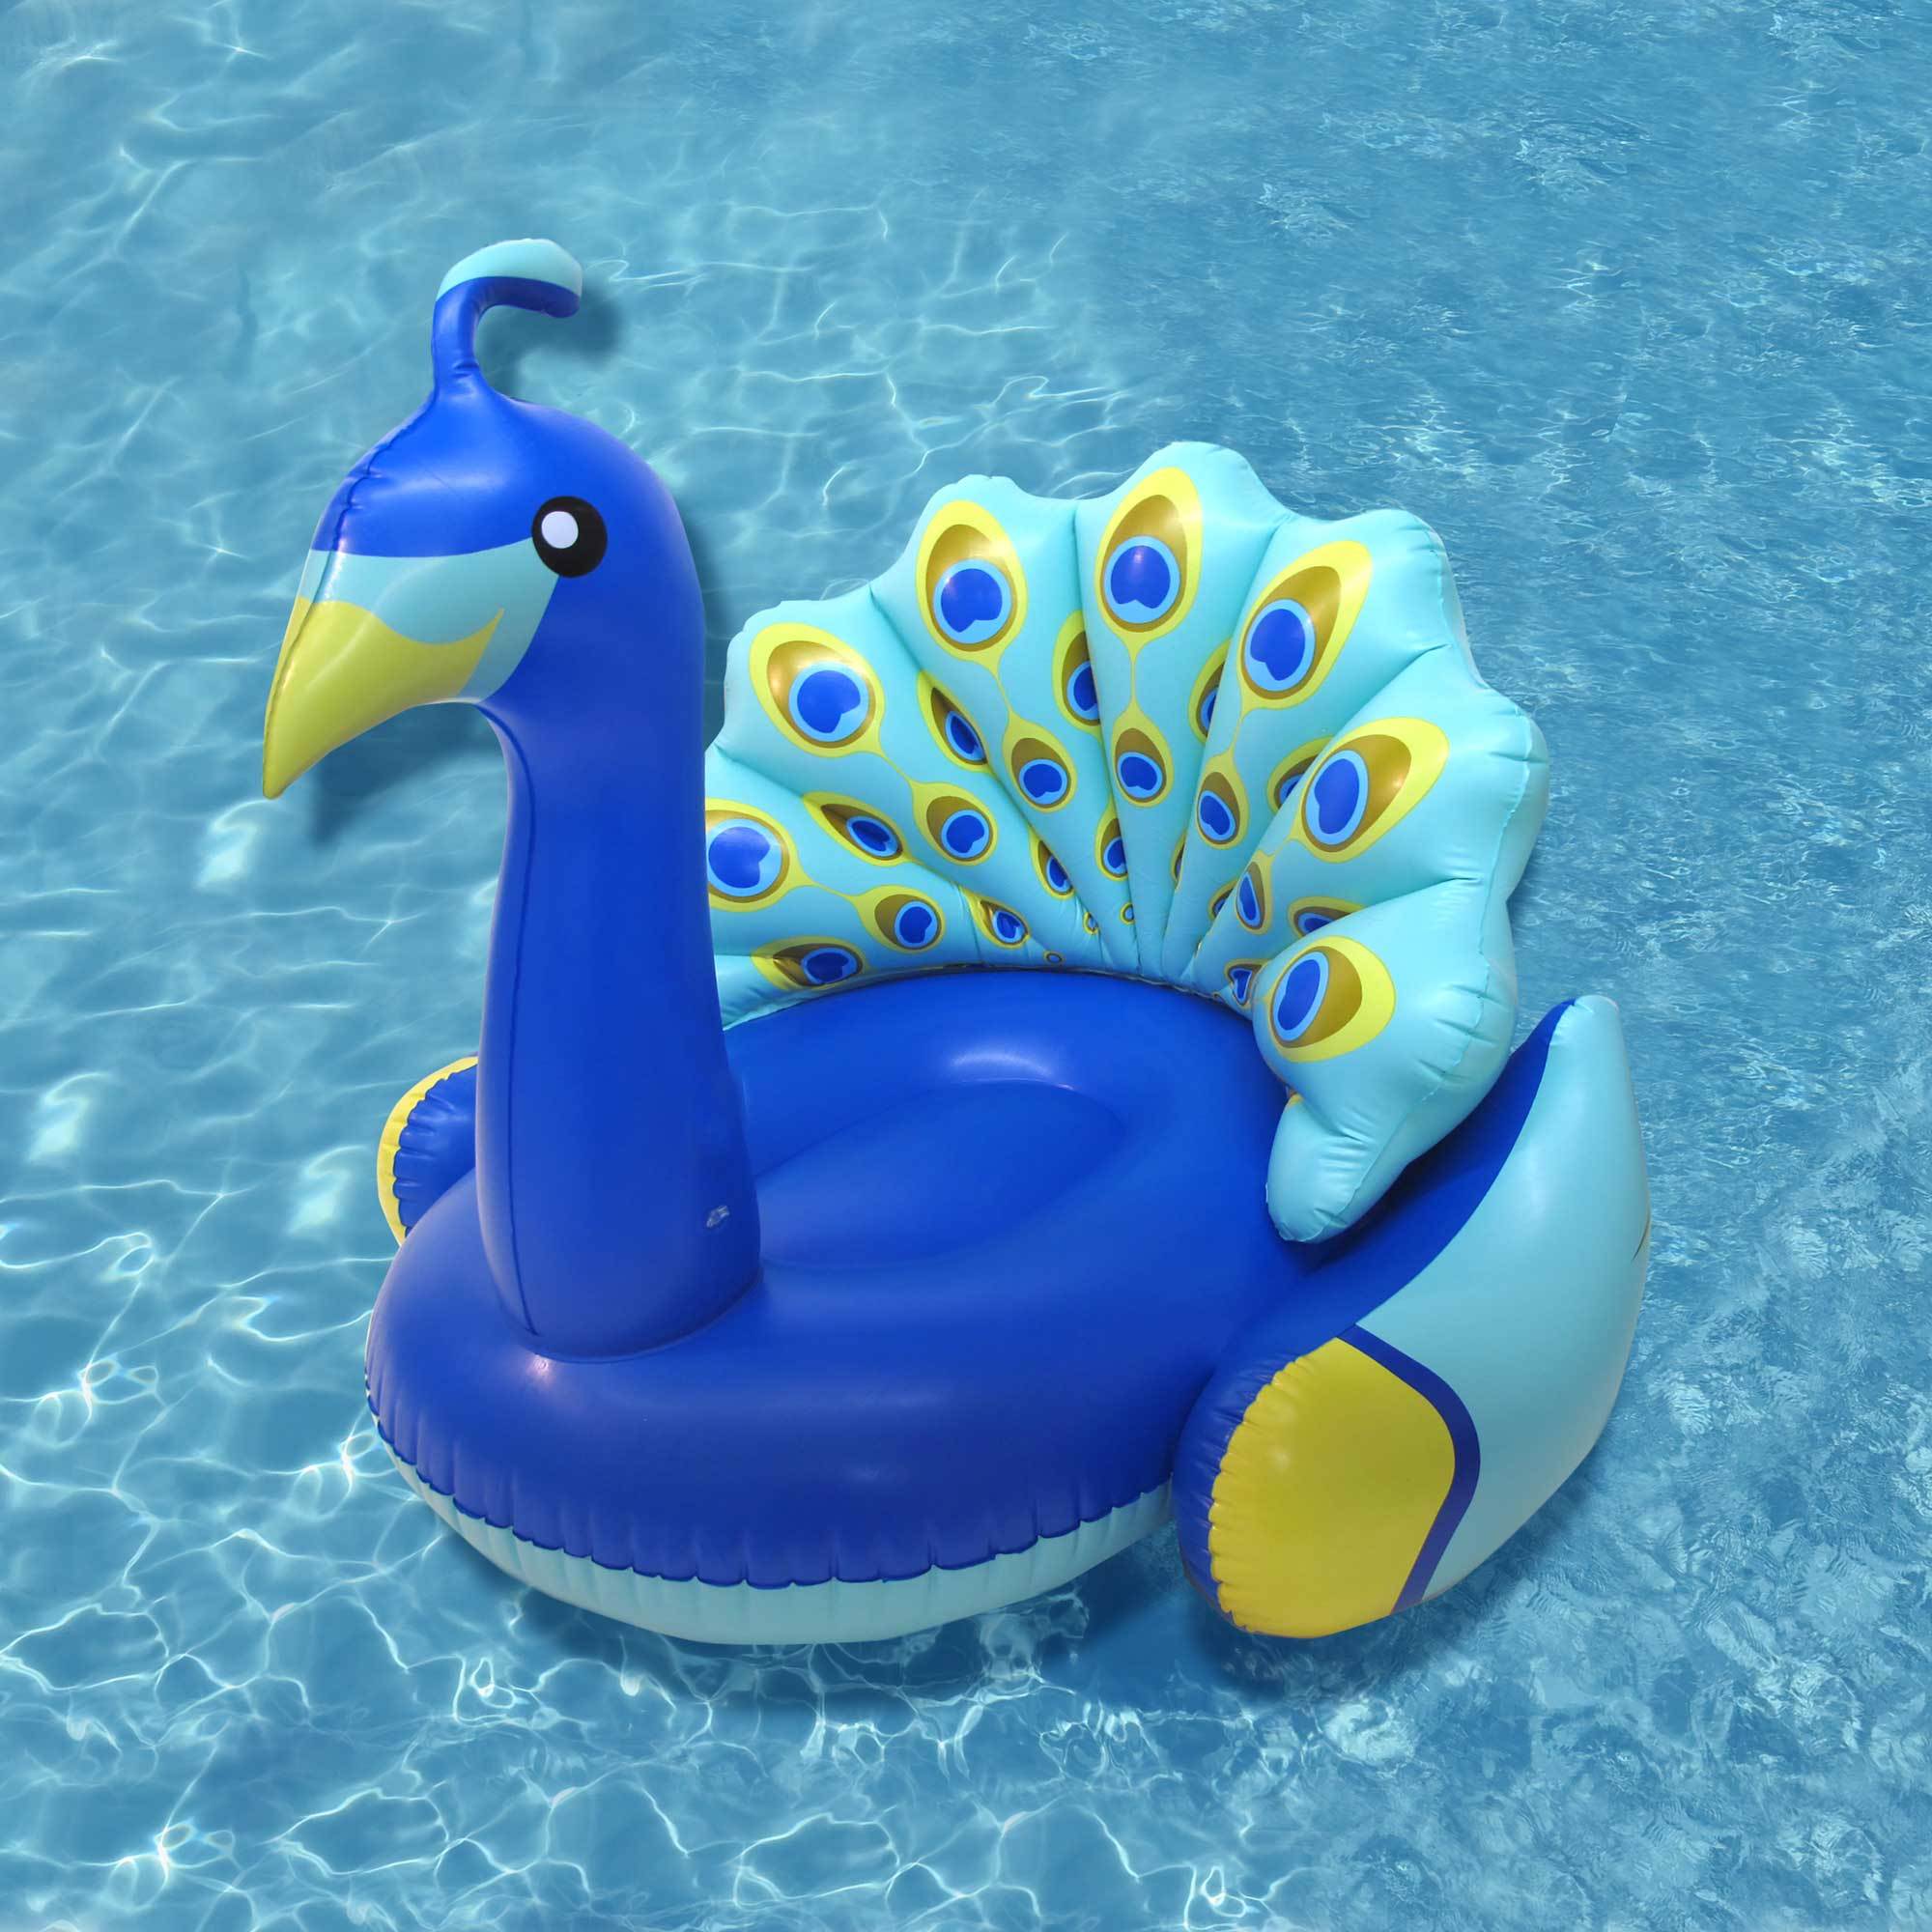 Swimline 90705 Inflatable Peacock Giant Swimming Pool Float with Backrest, Blue 723815907059 | eBay